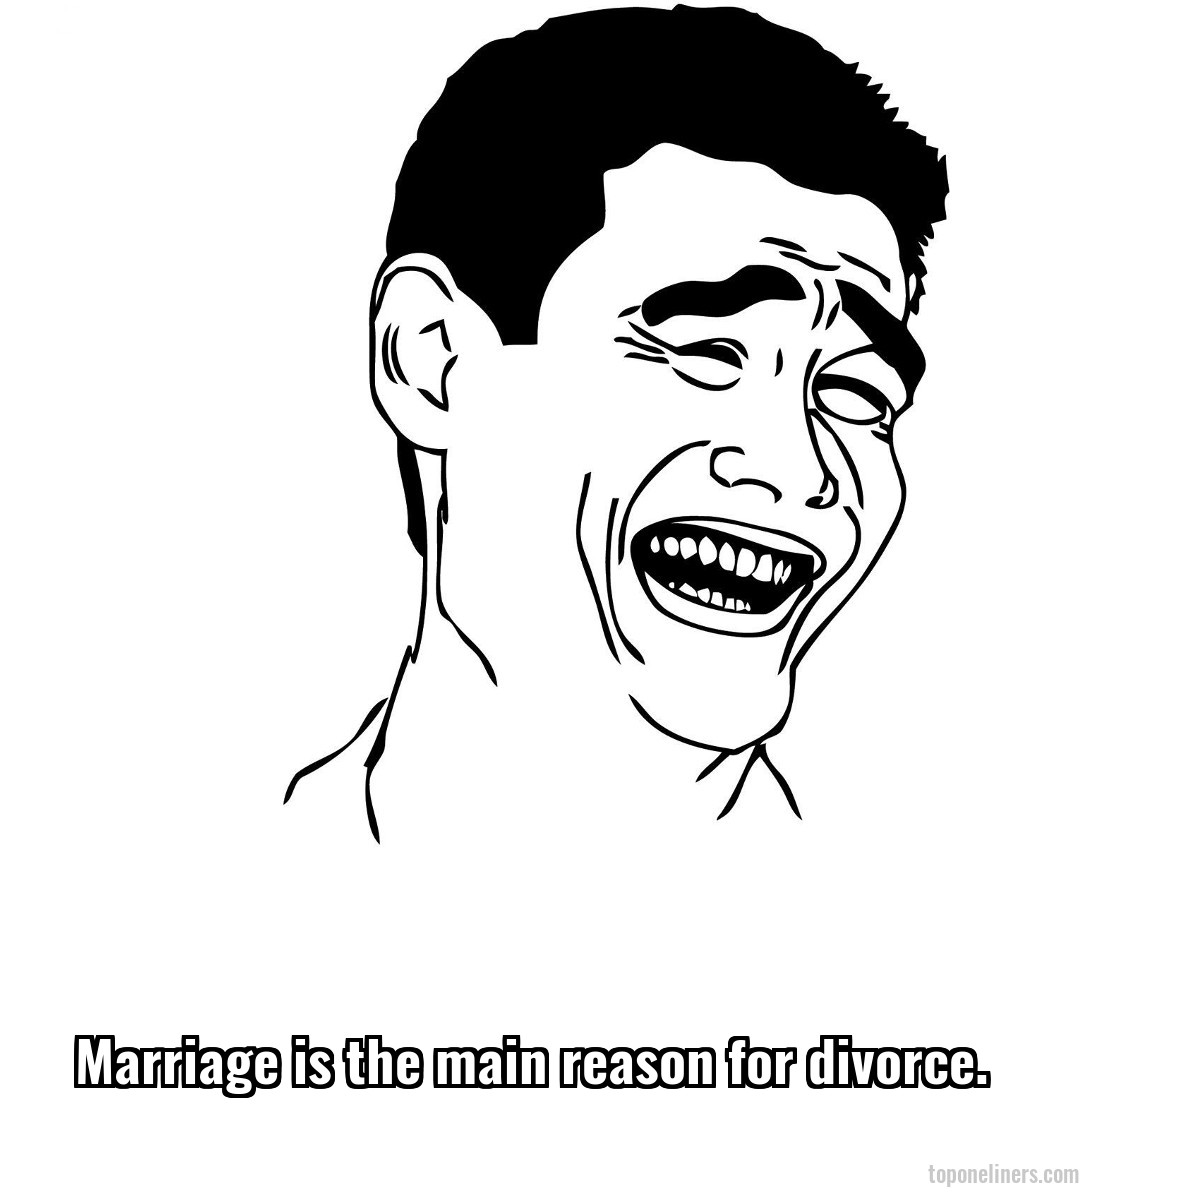 Marriage is the main reason for divorce.
